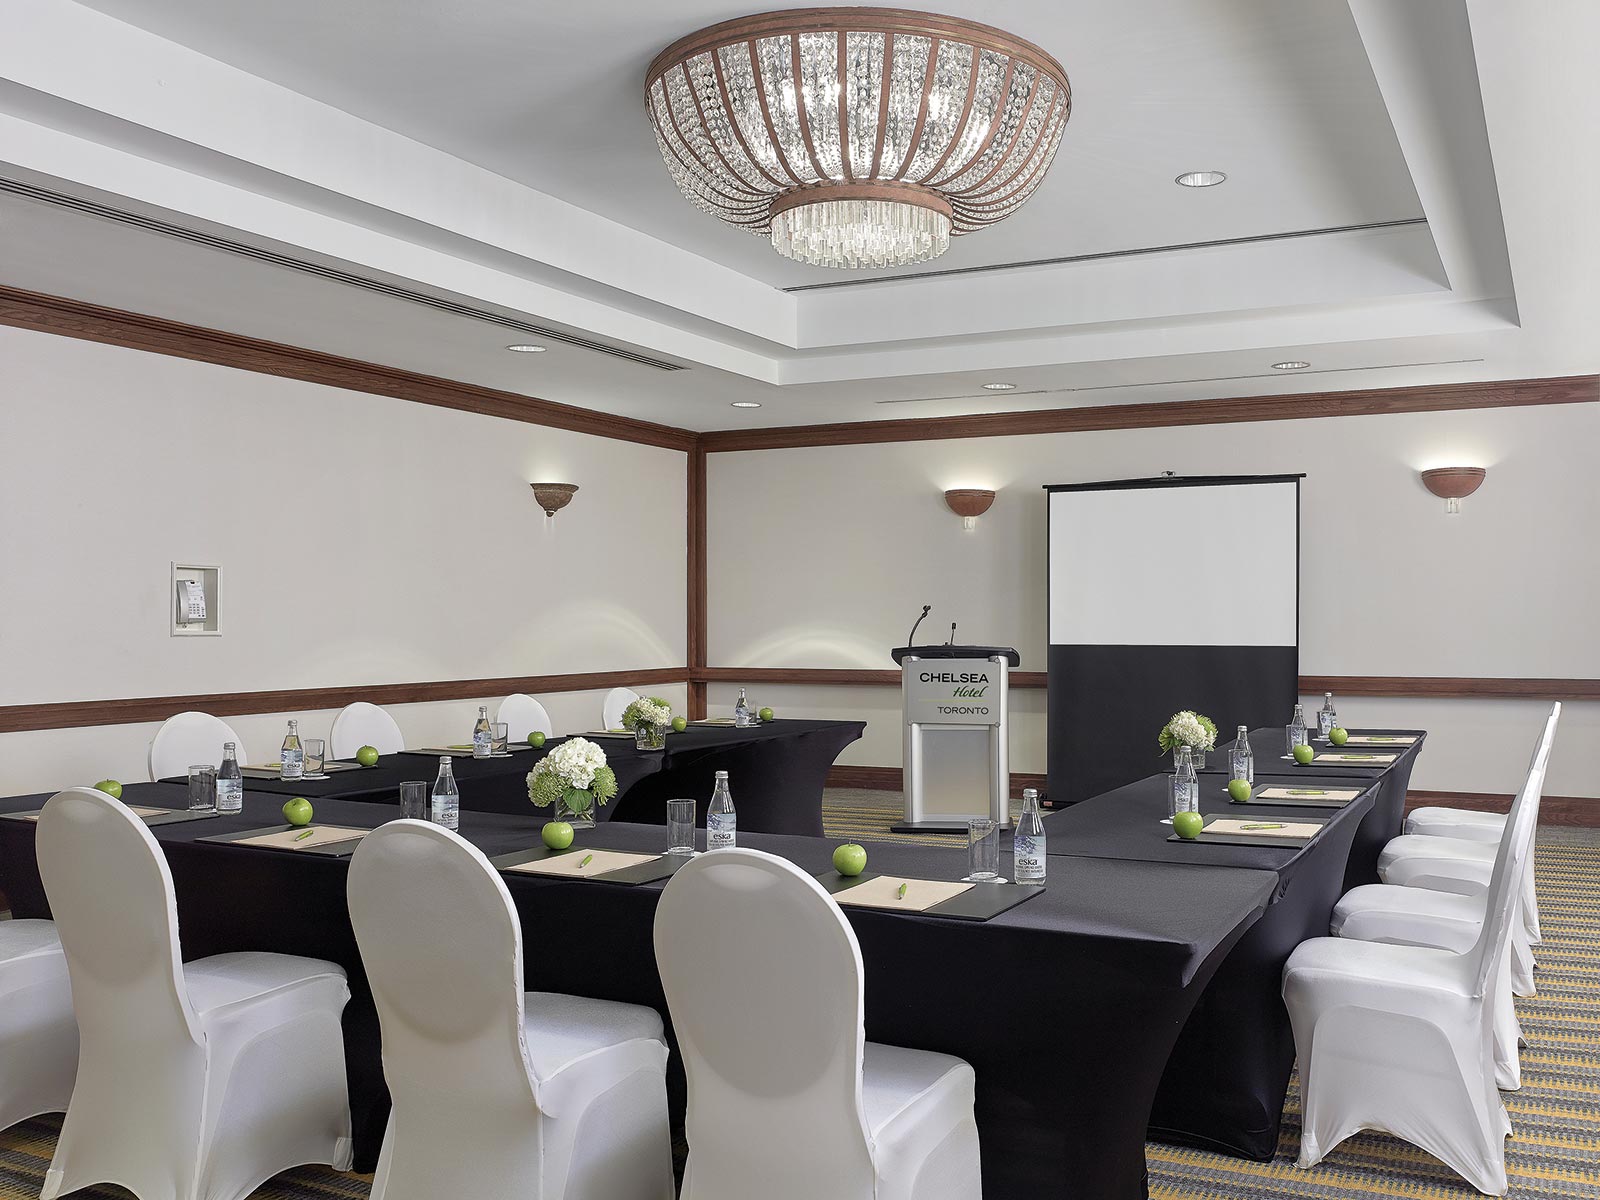 baker-room, Corporate Meeting & Conference Rooms in Chelsea Hotel, Toronto